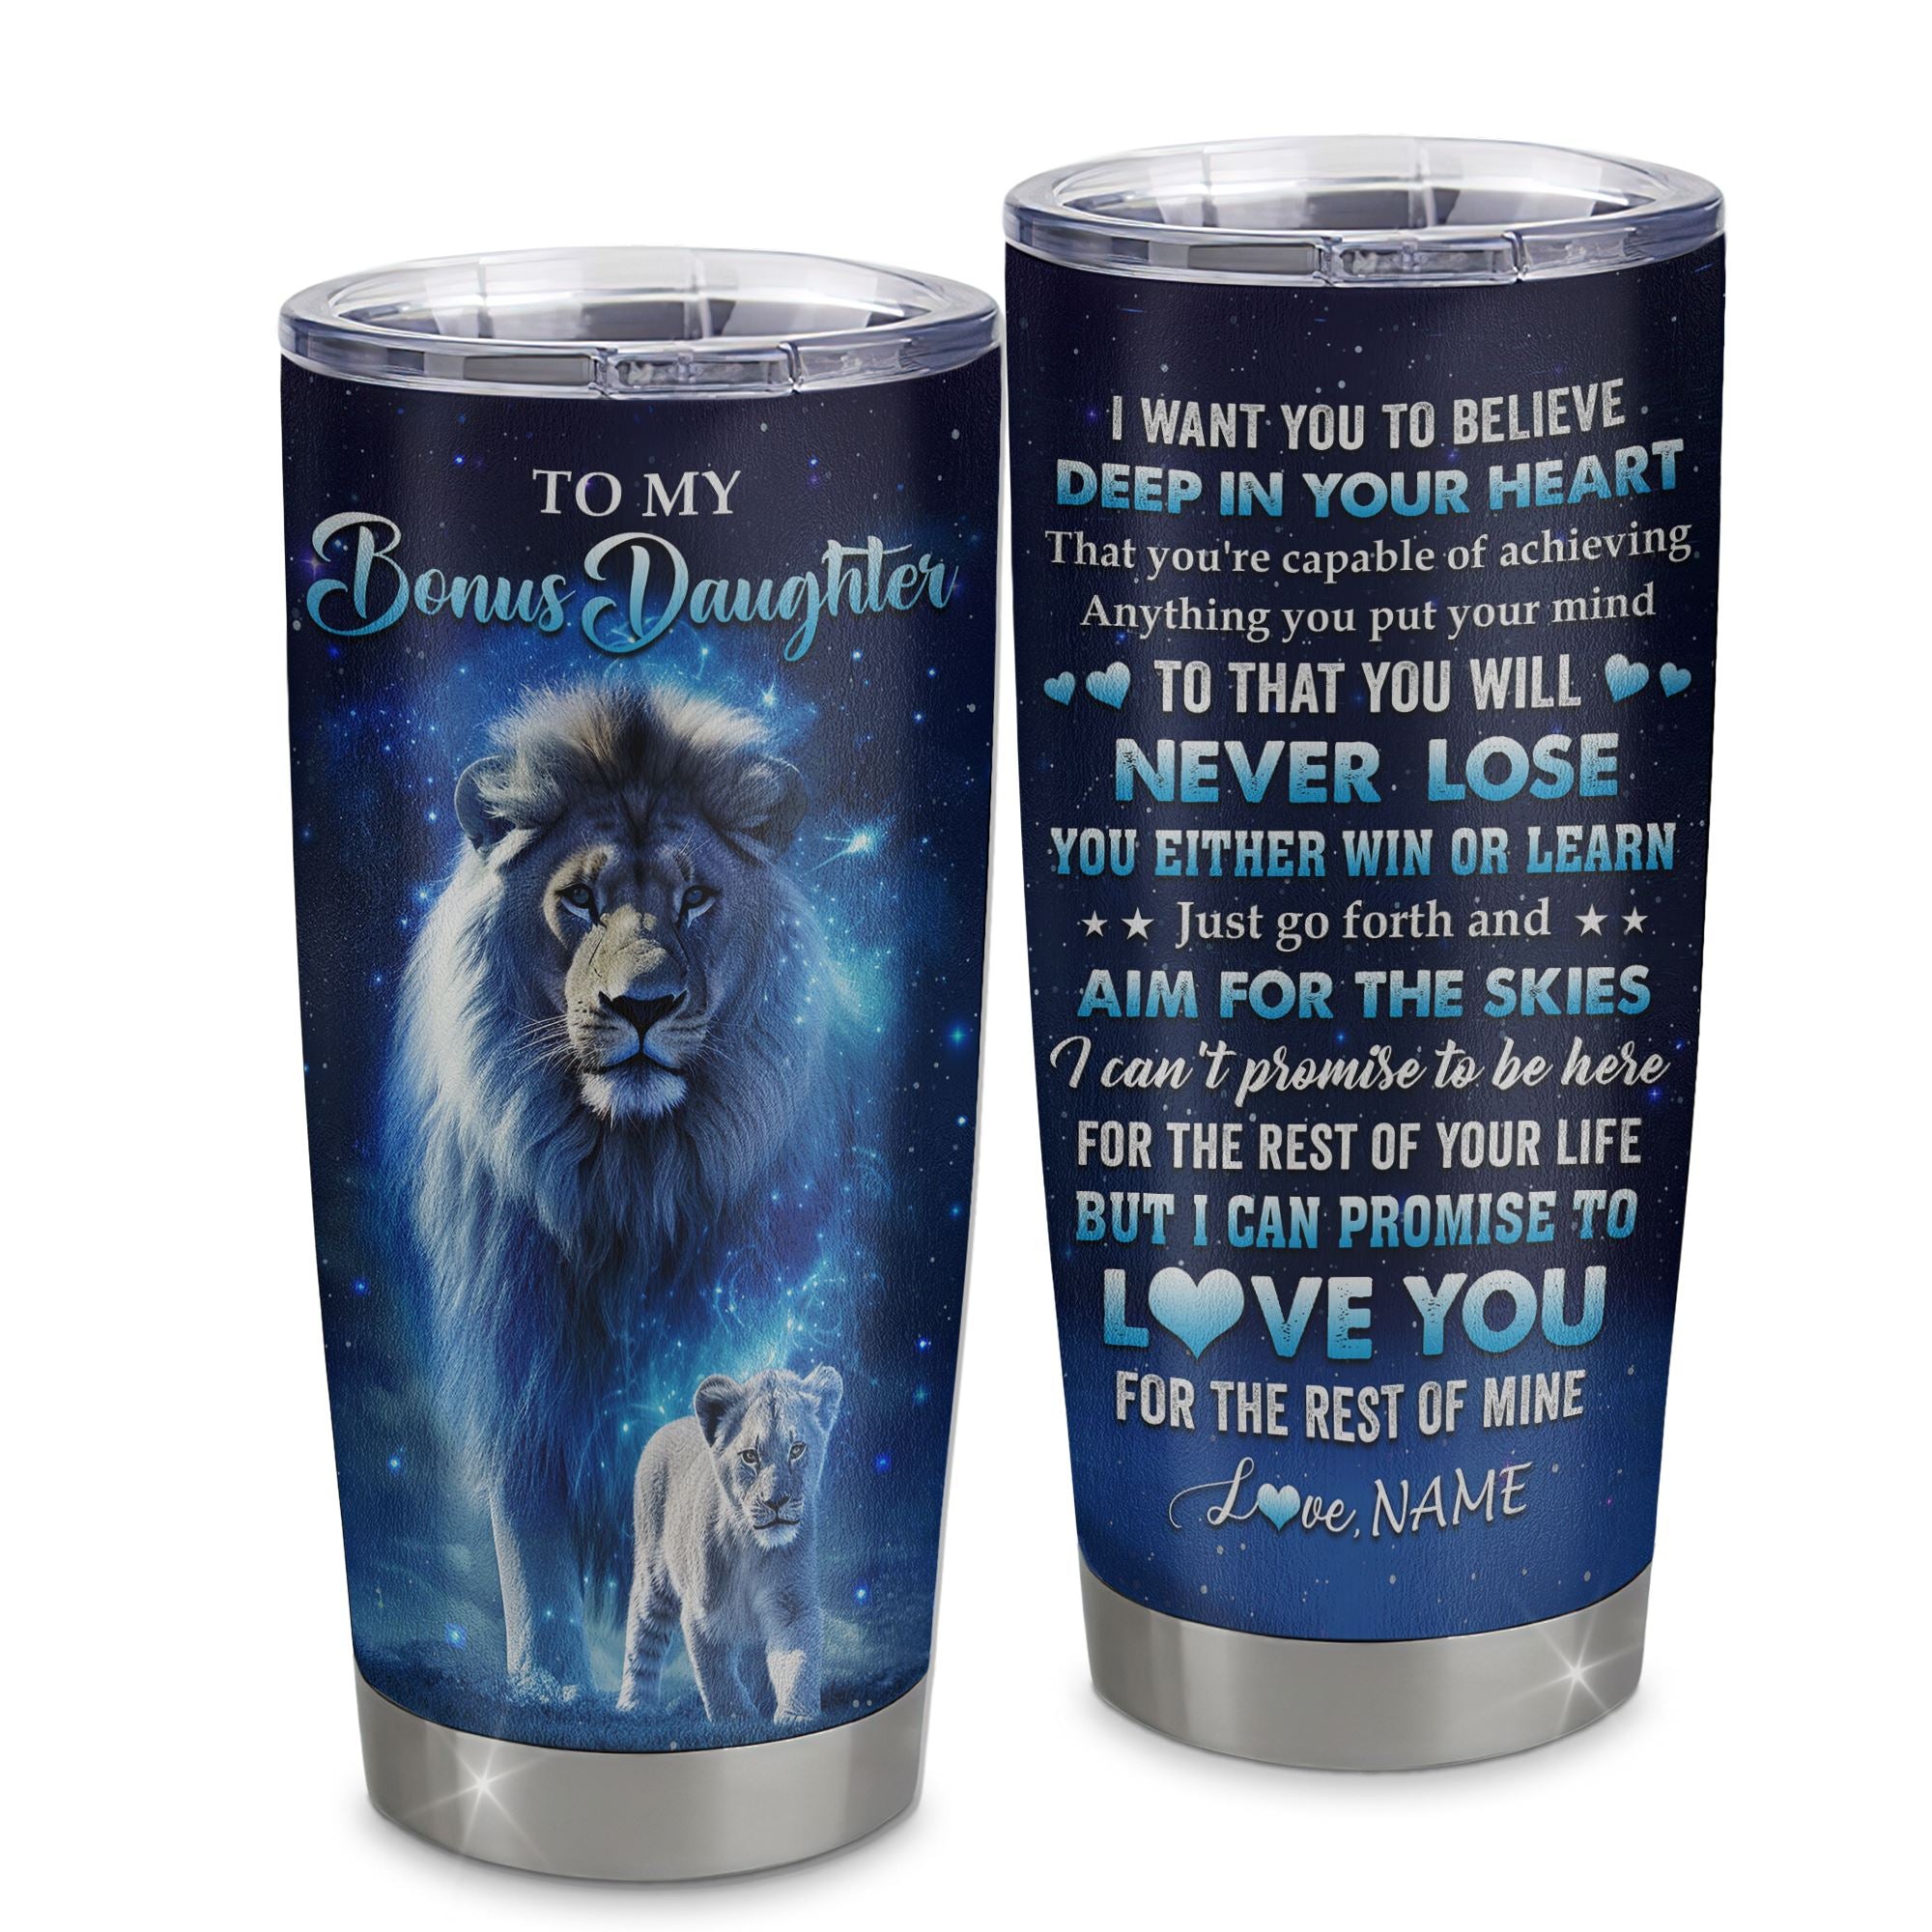 Personalized_To_My_Bonus_Daughter_Lion_From_Stepmother_Tumbler_Stainless_Steel_Believe_Your_Heart_Stepdaughter_Gift_Birthday_Graduation_Christmas_Travel_Mug_Tumbler_mockup_1.jpg